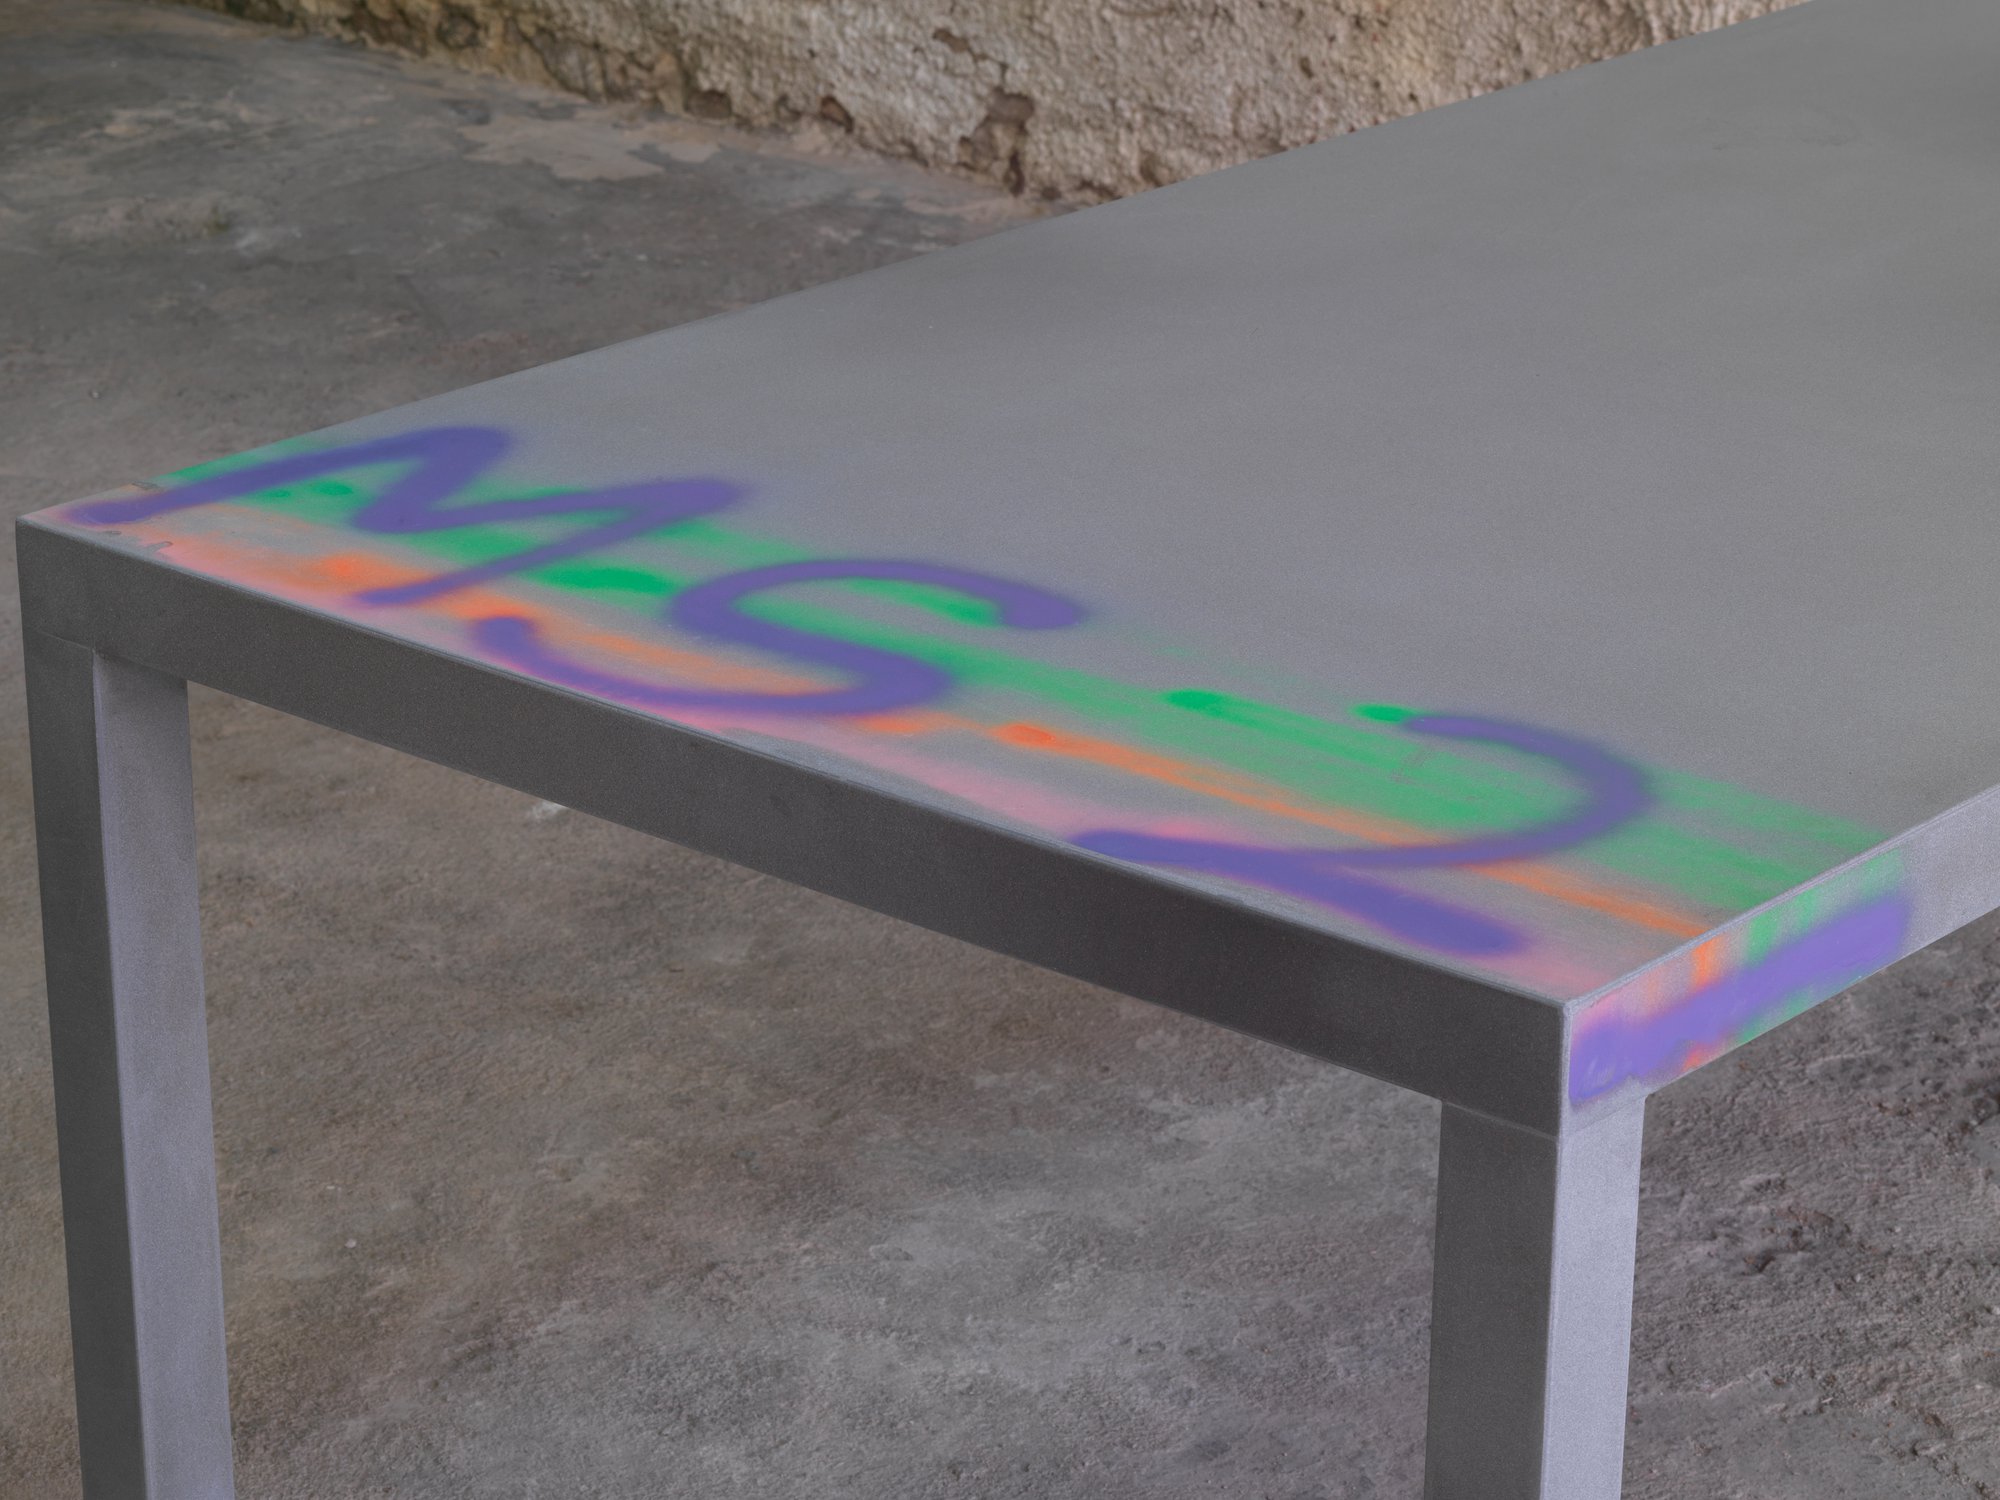 Christodoulos Panayiotou, Untitled, detail, titanium grey marble table, 200 x 100 x 74.5 cm (78 3/4 x 39 3/8 x 29 3/8 in), 2021